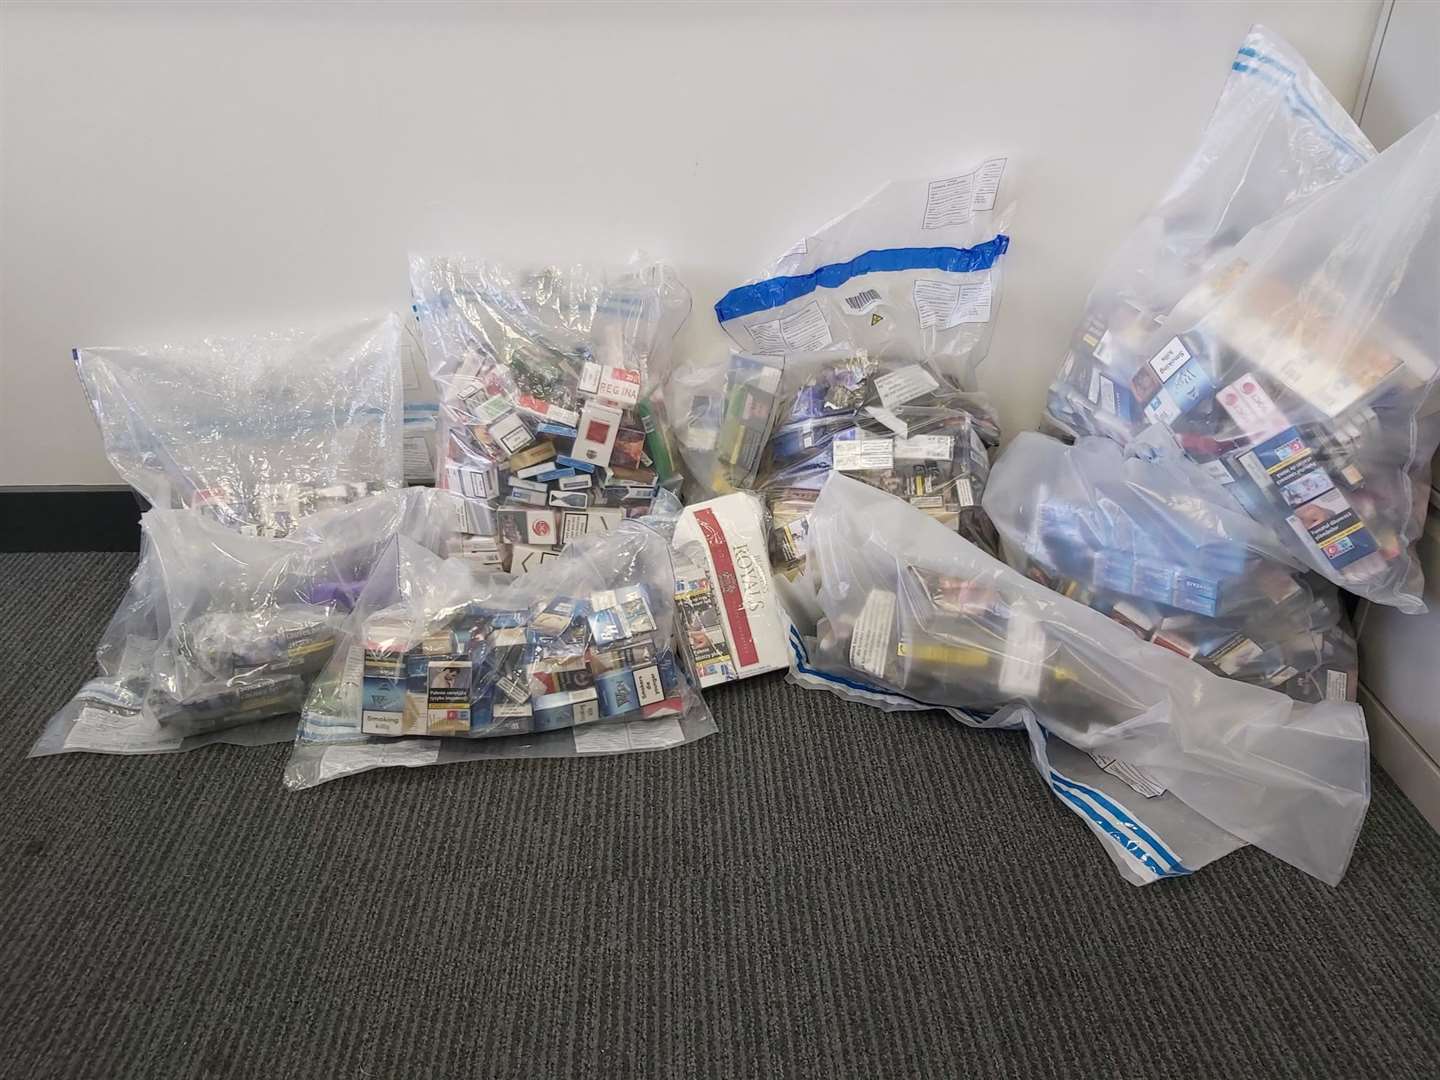 Police seized tobacco and cigarettes during raids on six shops in Gravesend